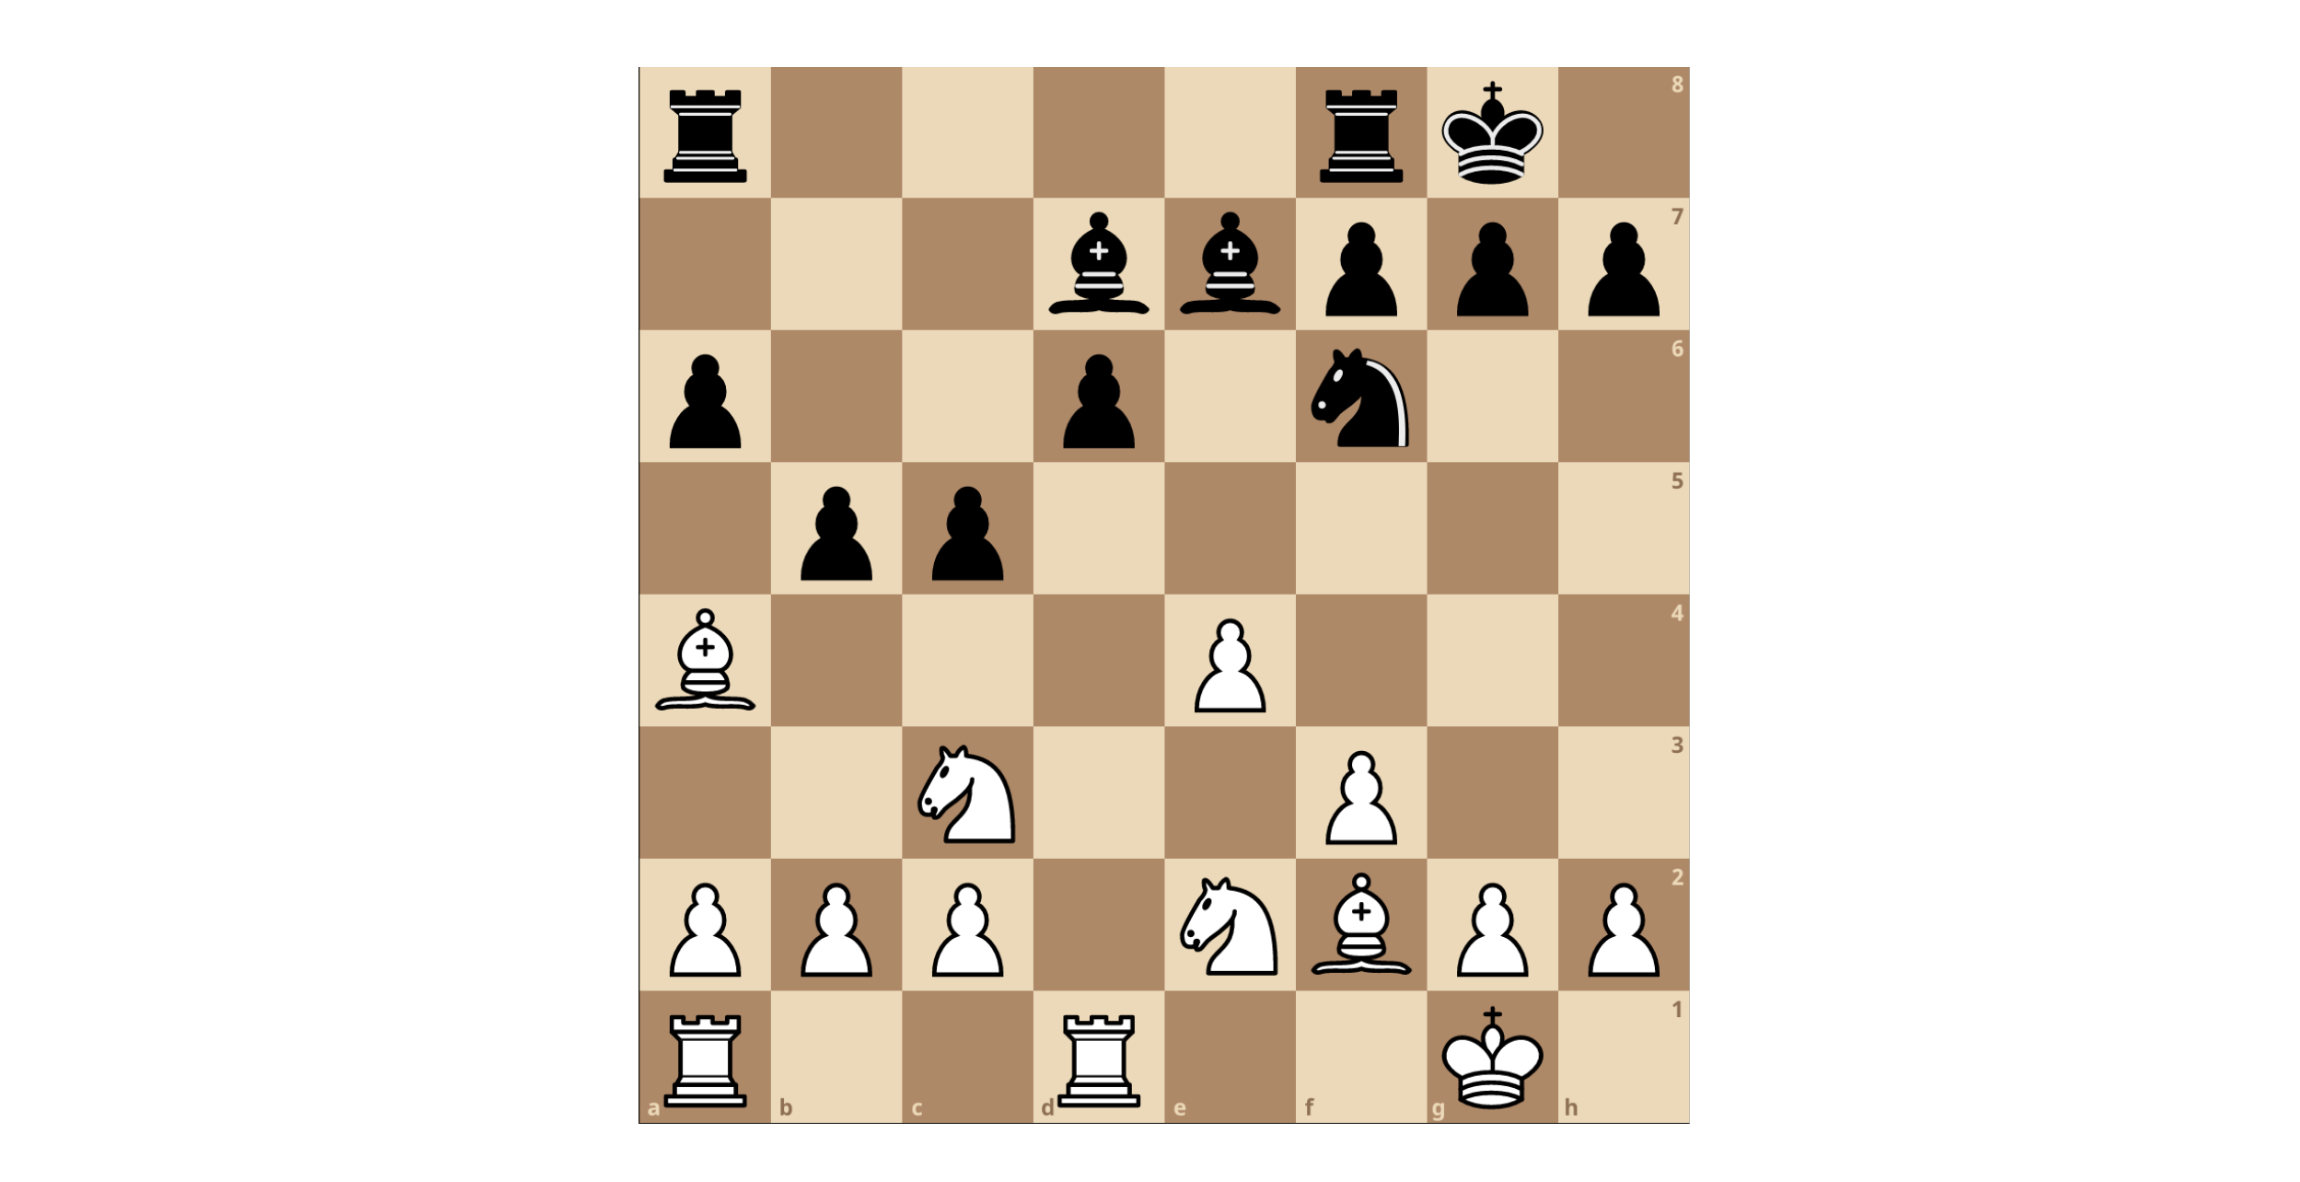 What is Depth in Chess? Different Depths for Stockfish and LCZero